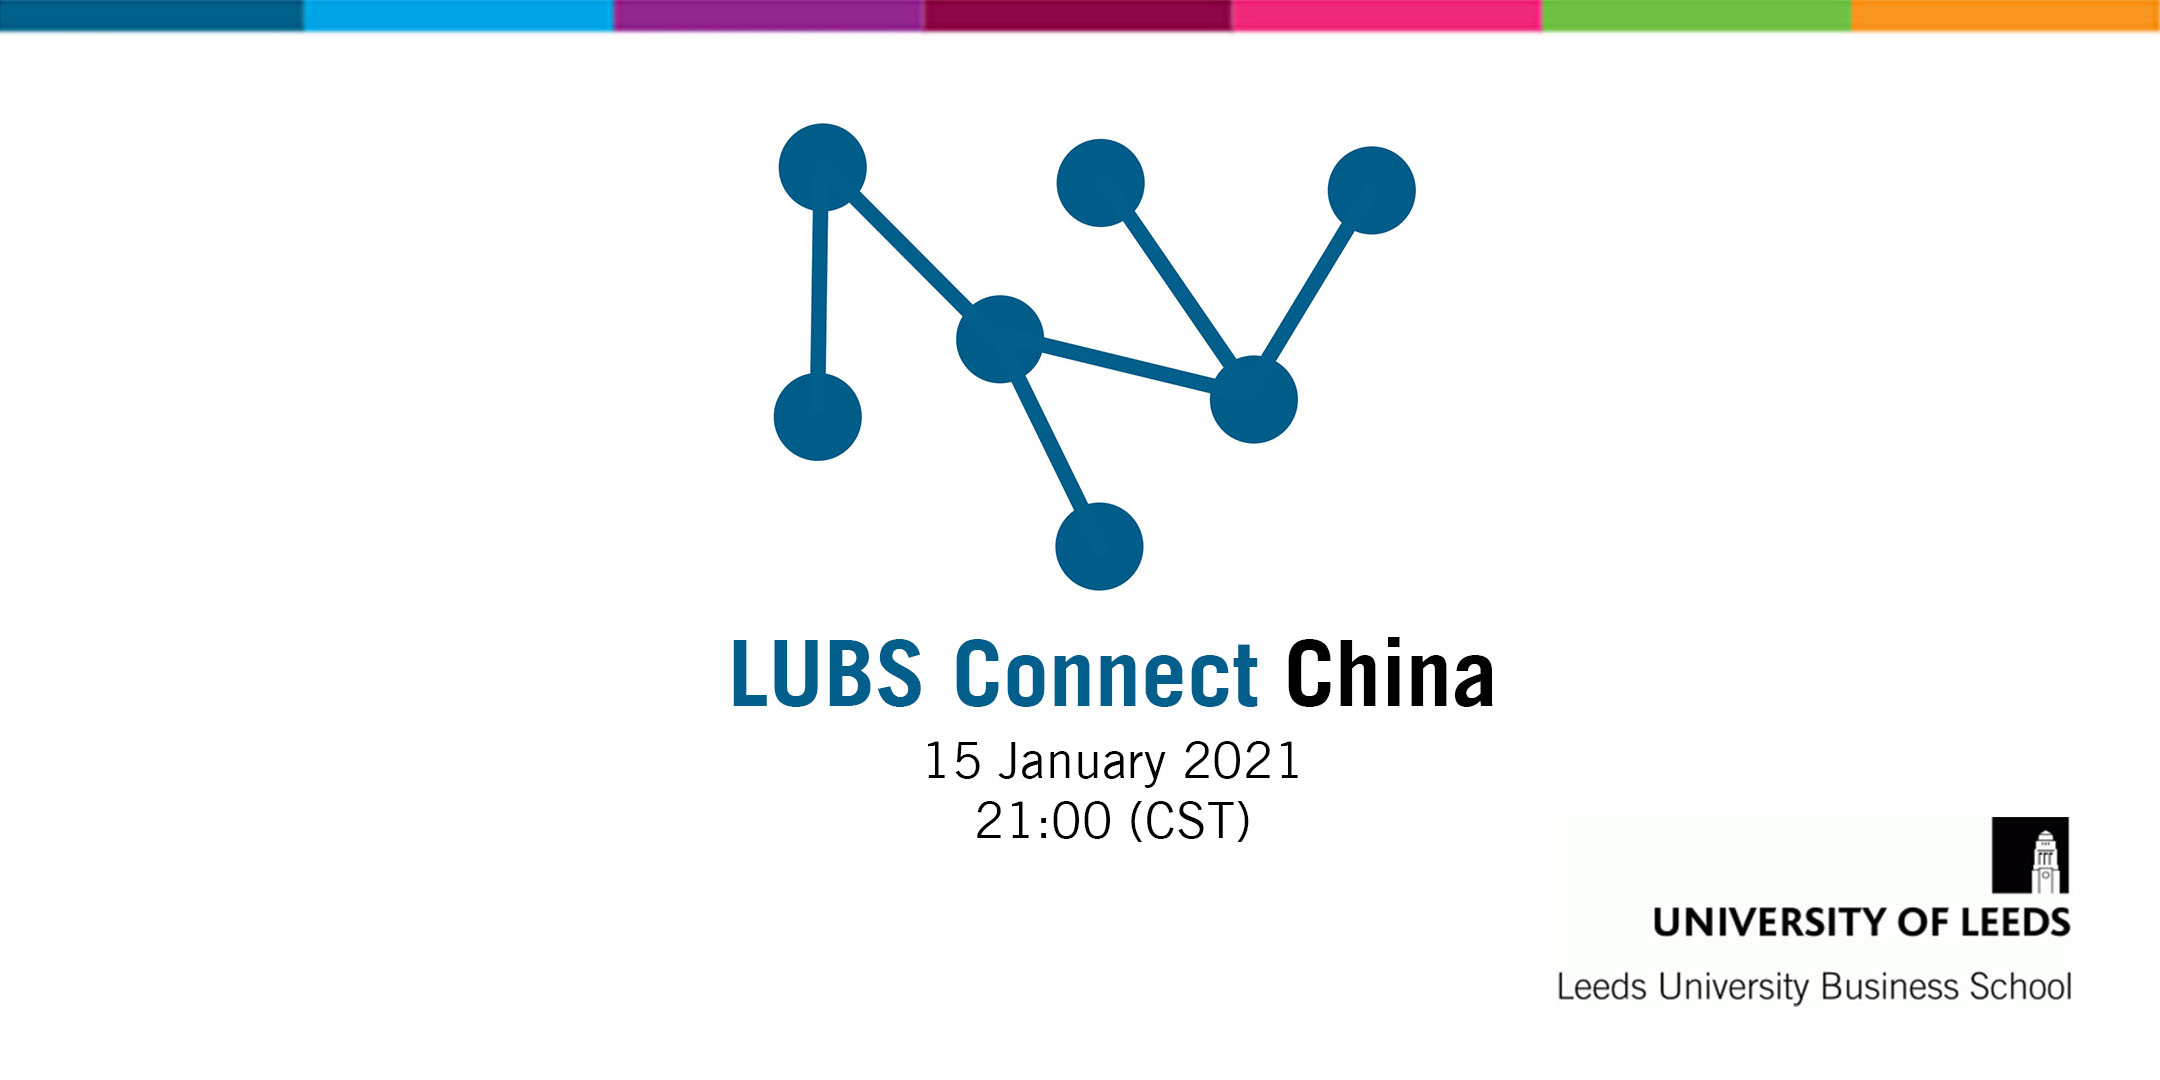 LUBS Connect China